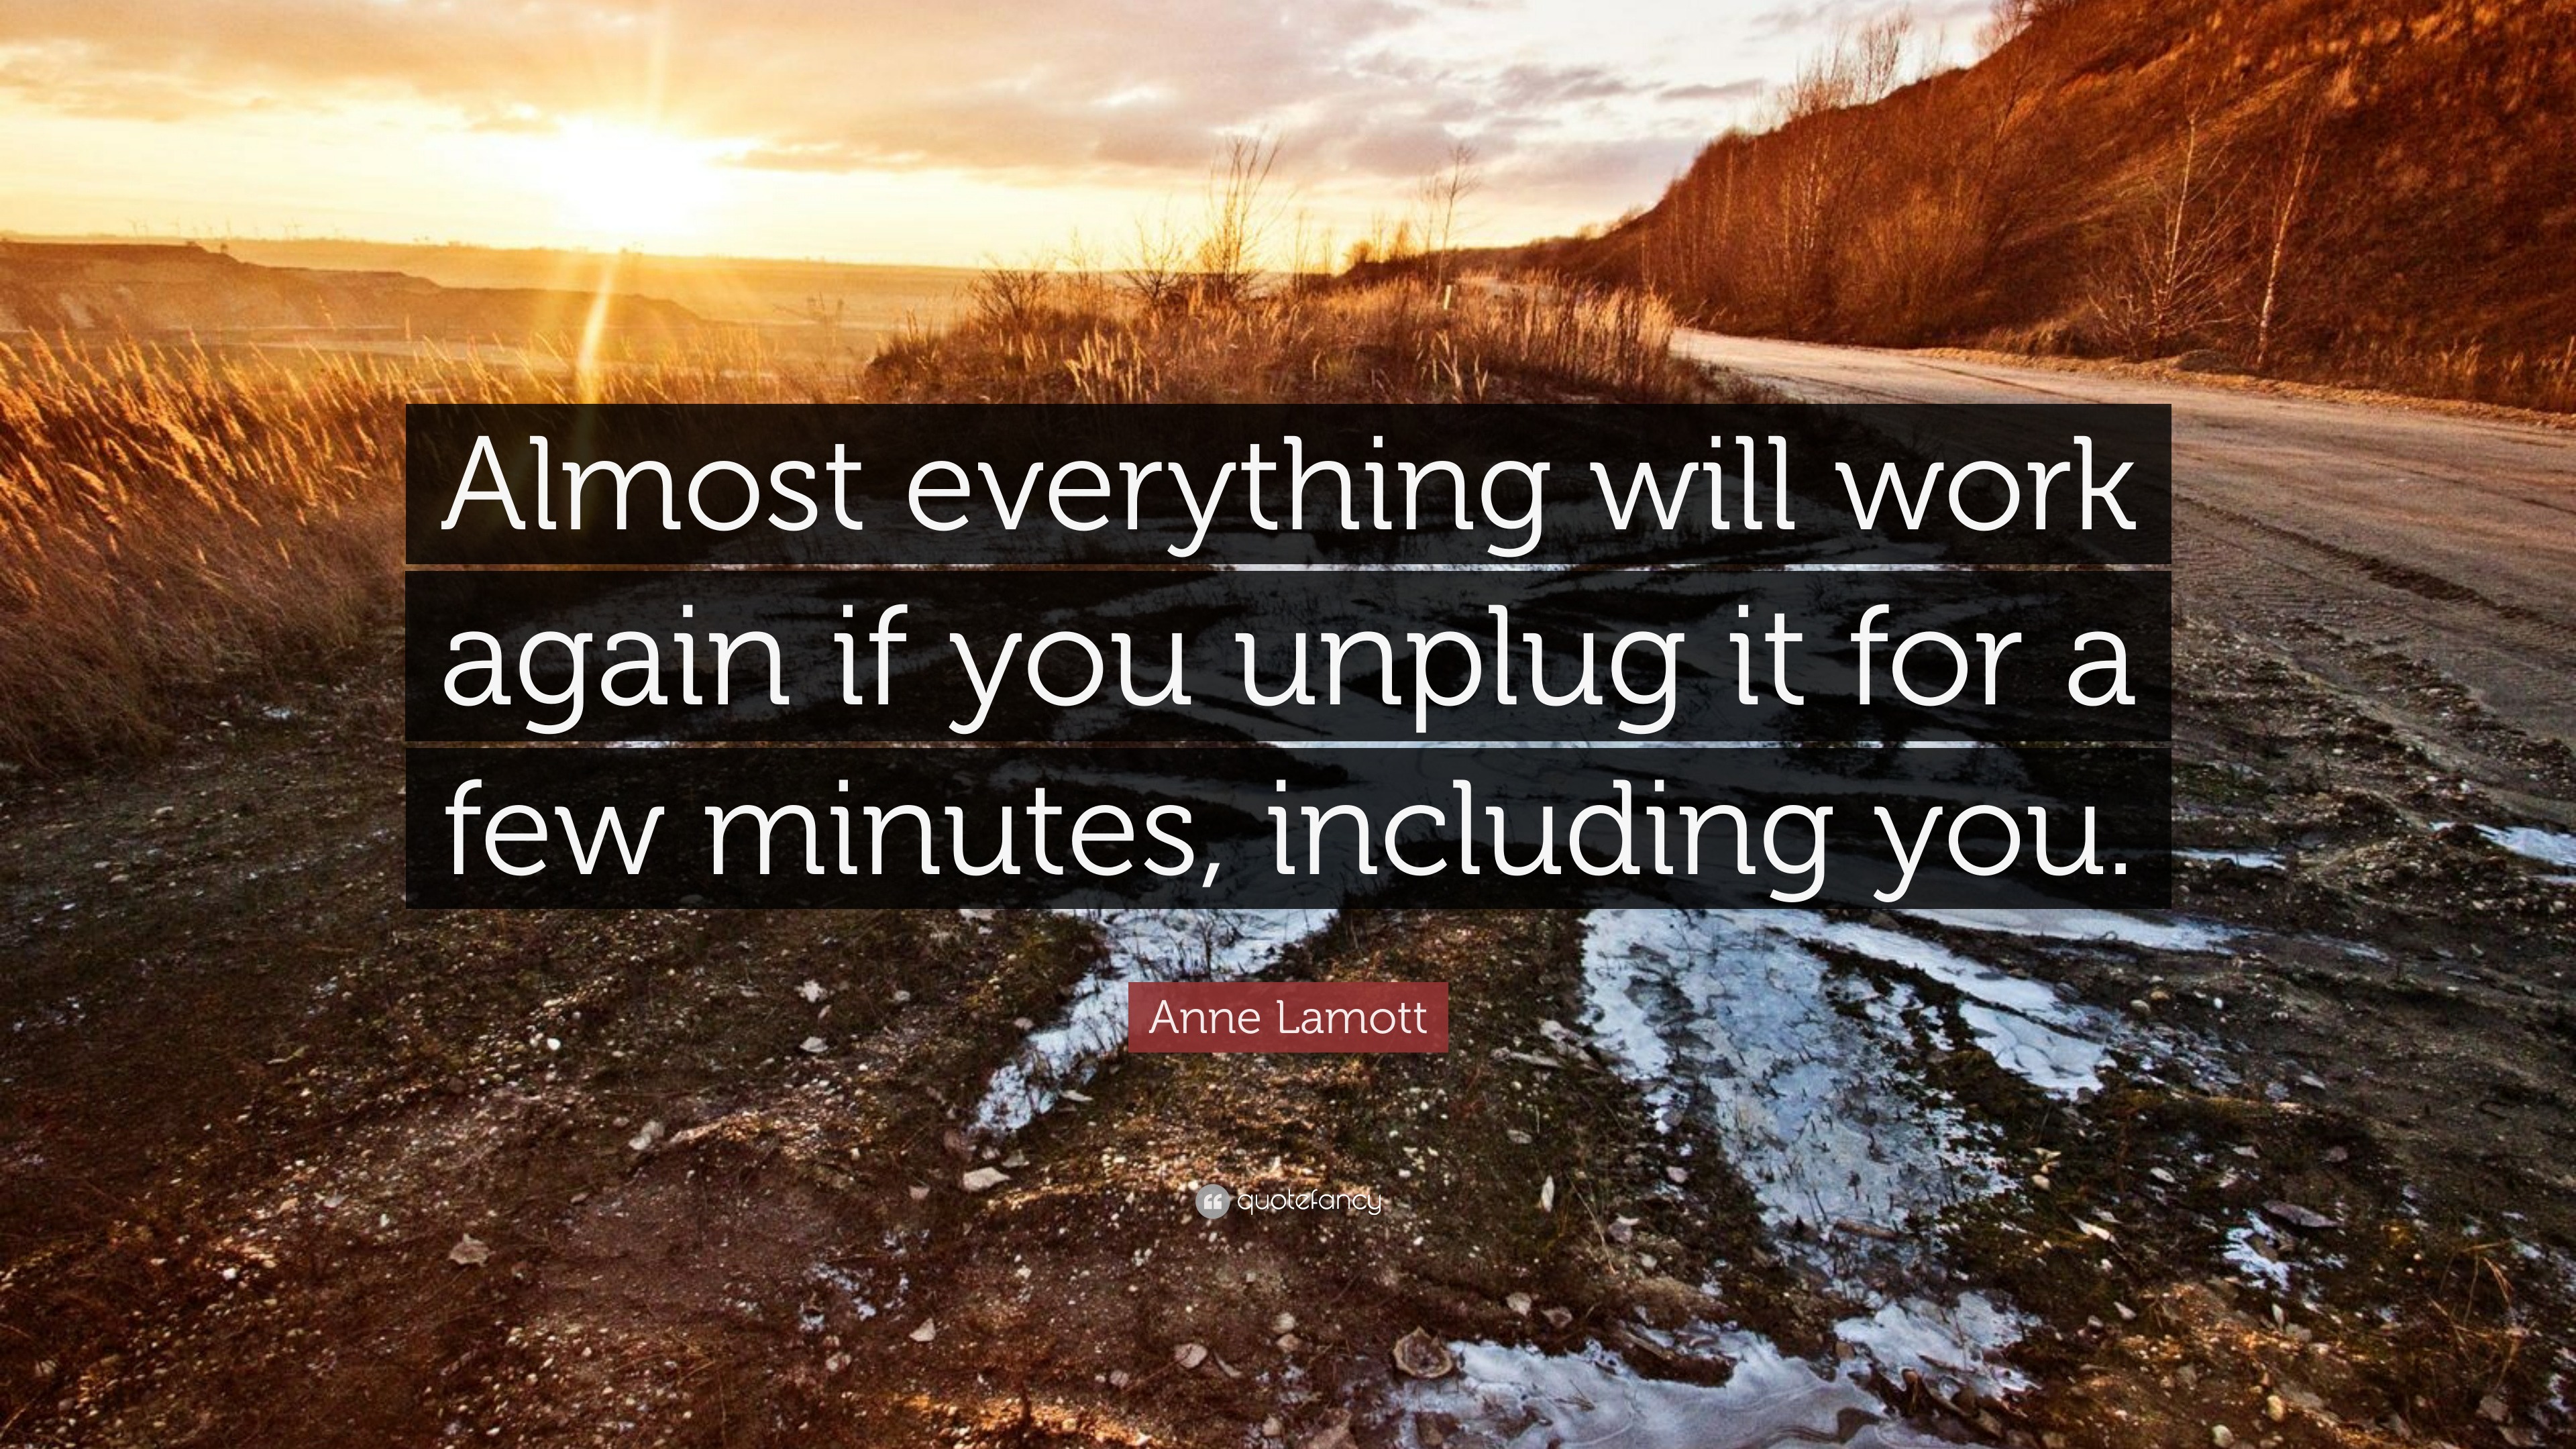 Anne Lamott Quote: "Almost everything will work again if ...